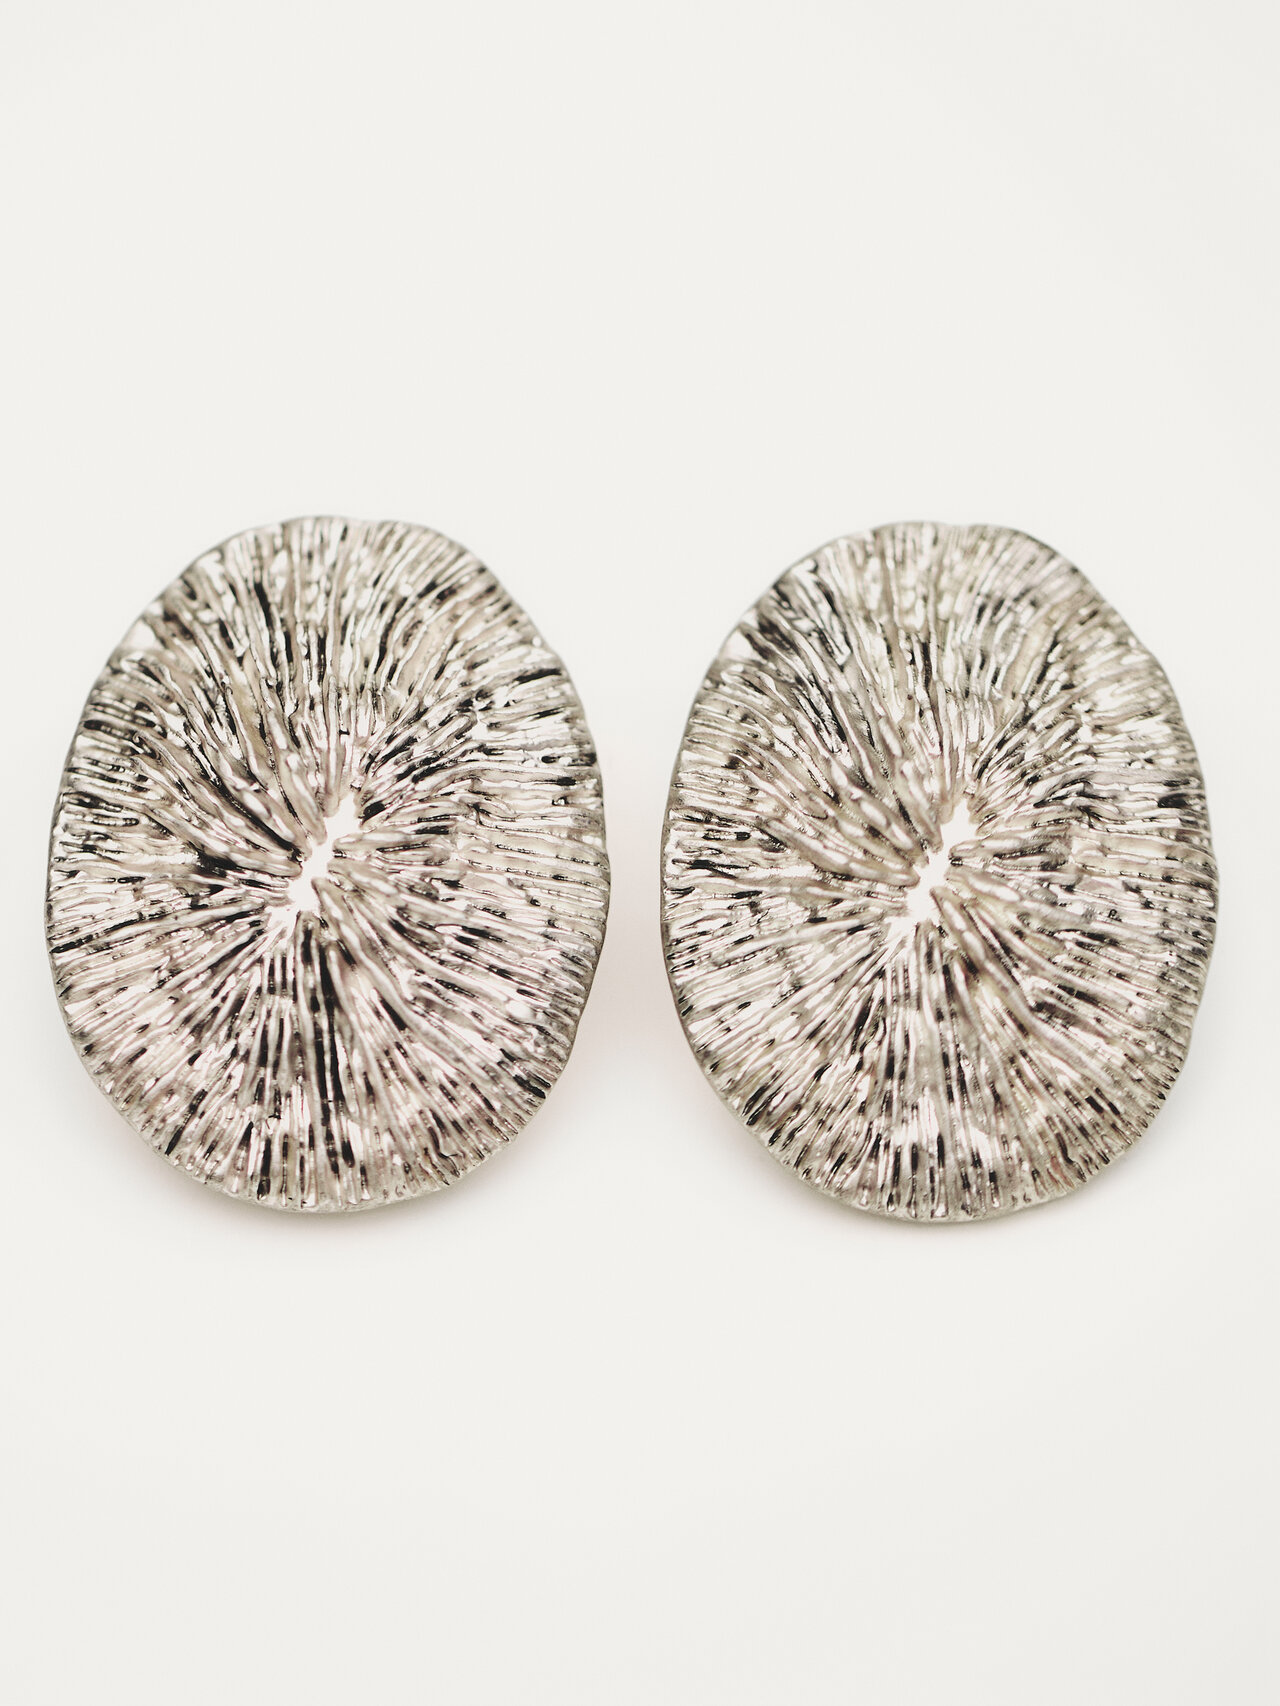 Textured oval earrings